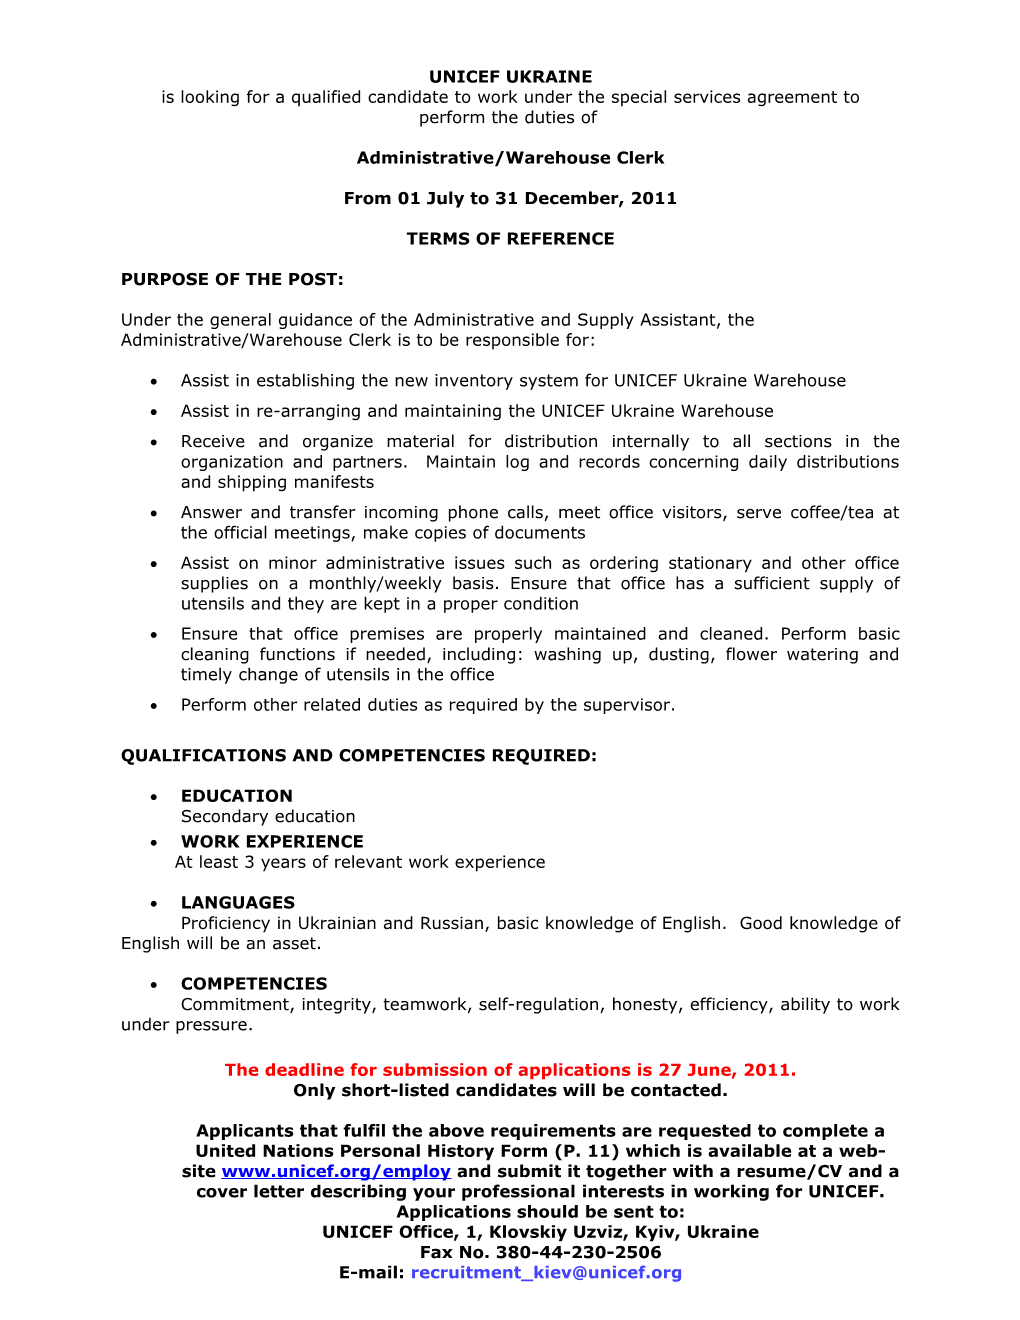 Is Looking for a Qualified Candidate to Work Under the Special Services Agreement To